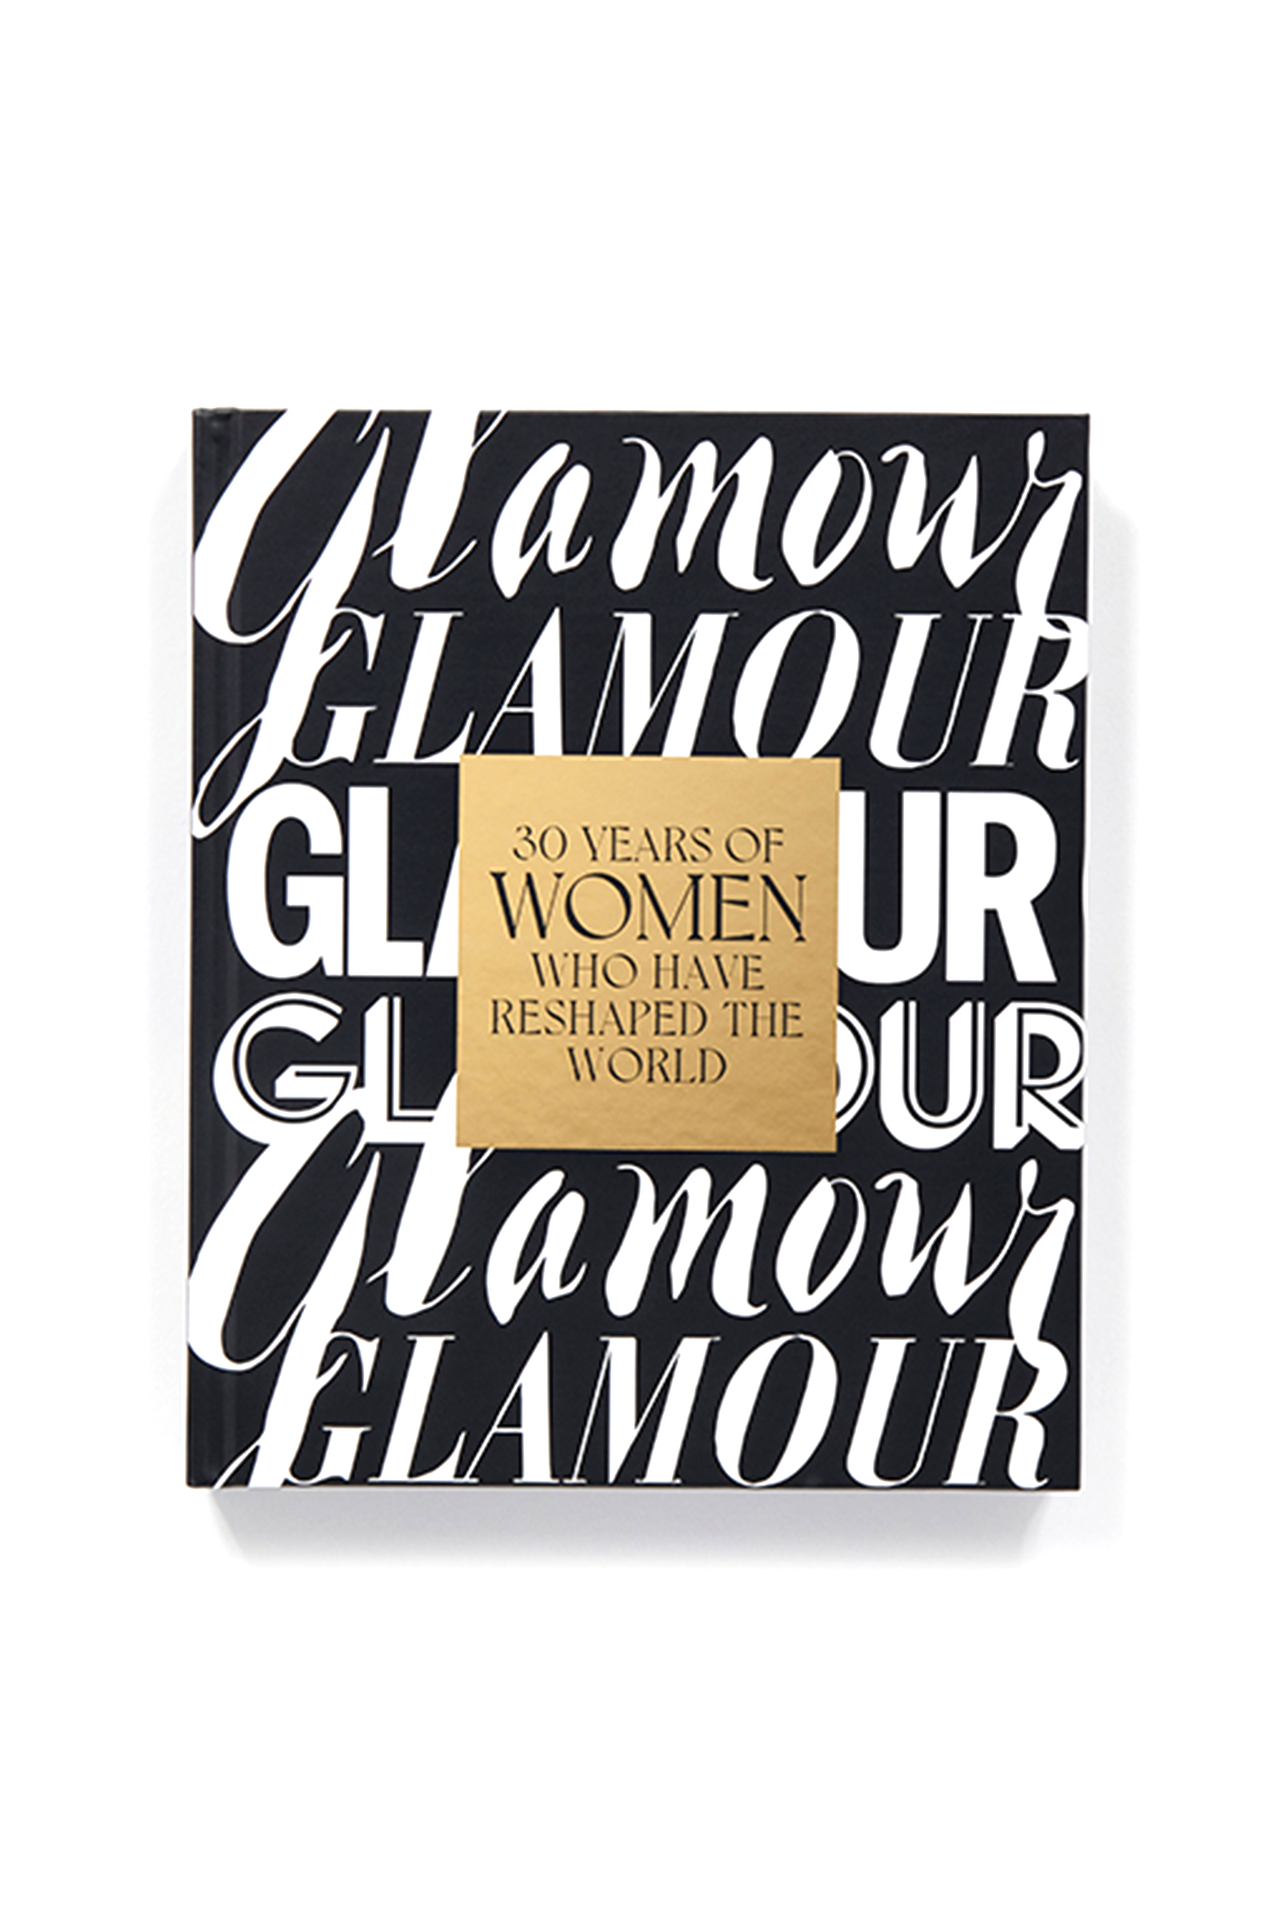 Glamour: 30 Years of Women Book Signed Edition Front Cover Image (6567473348723)